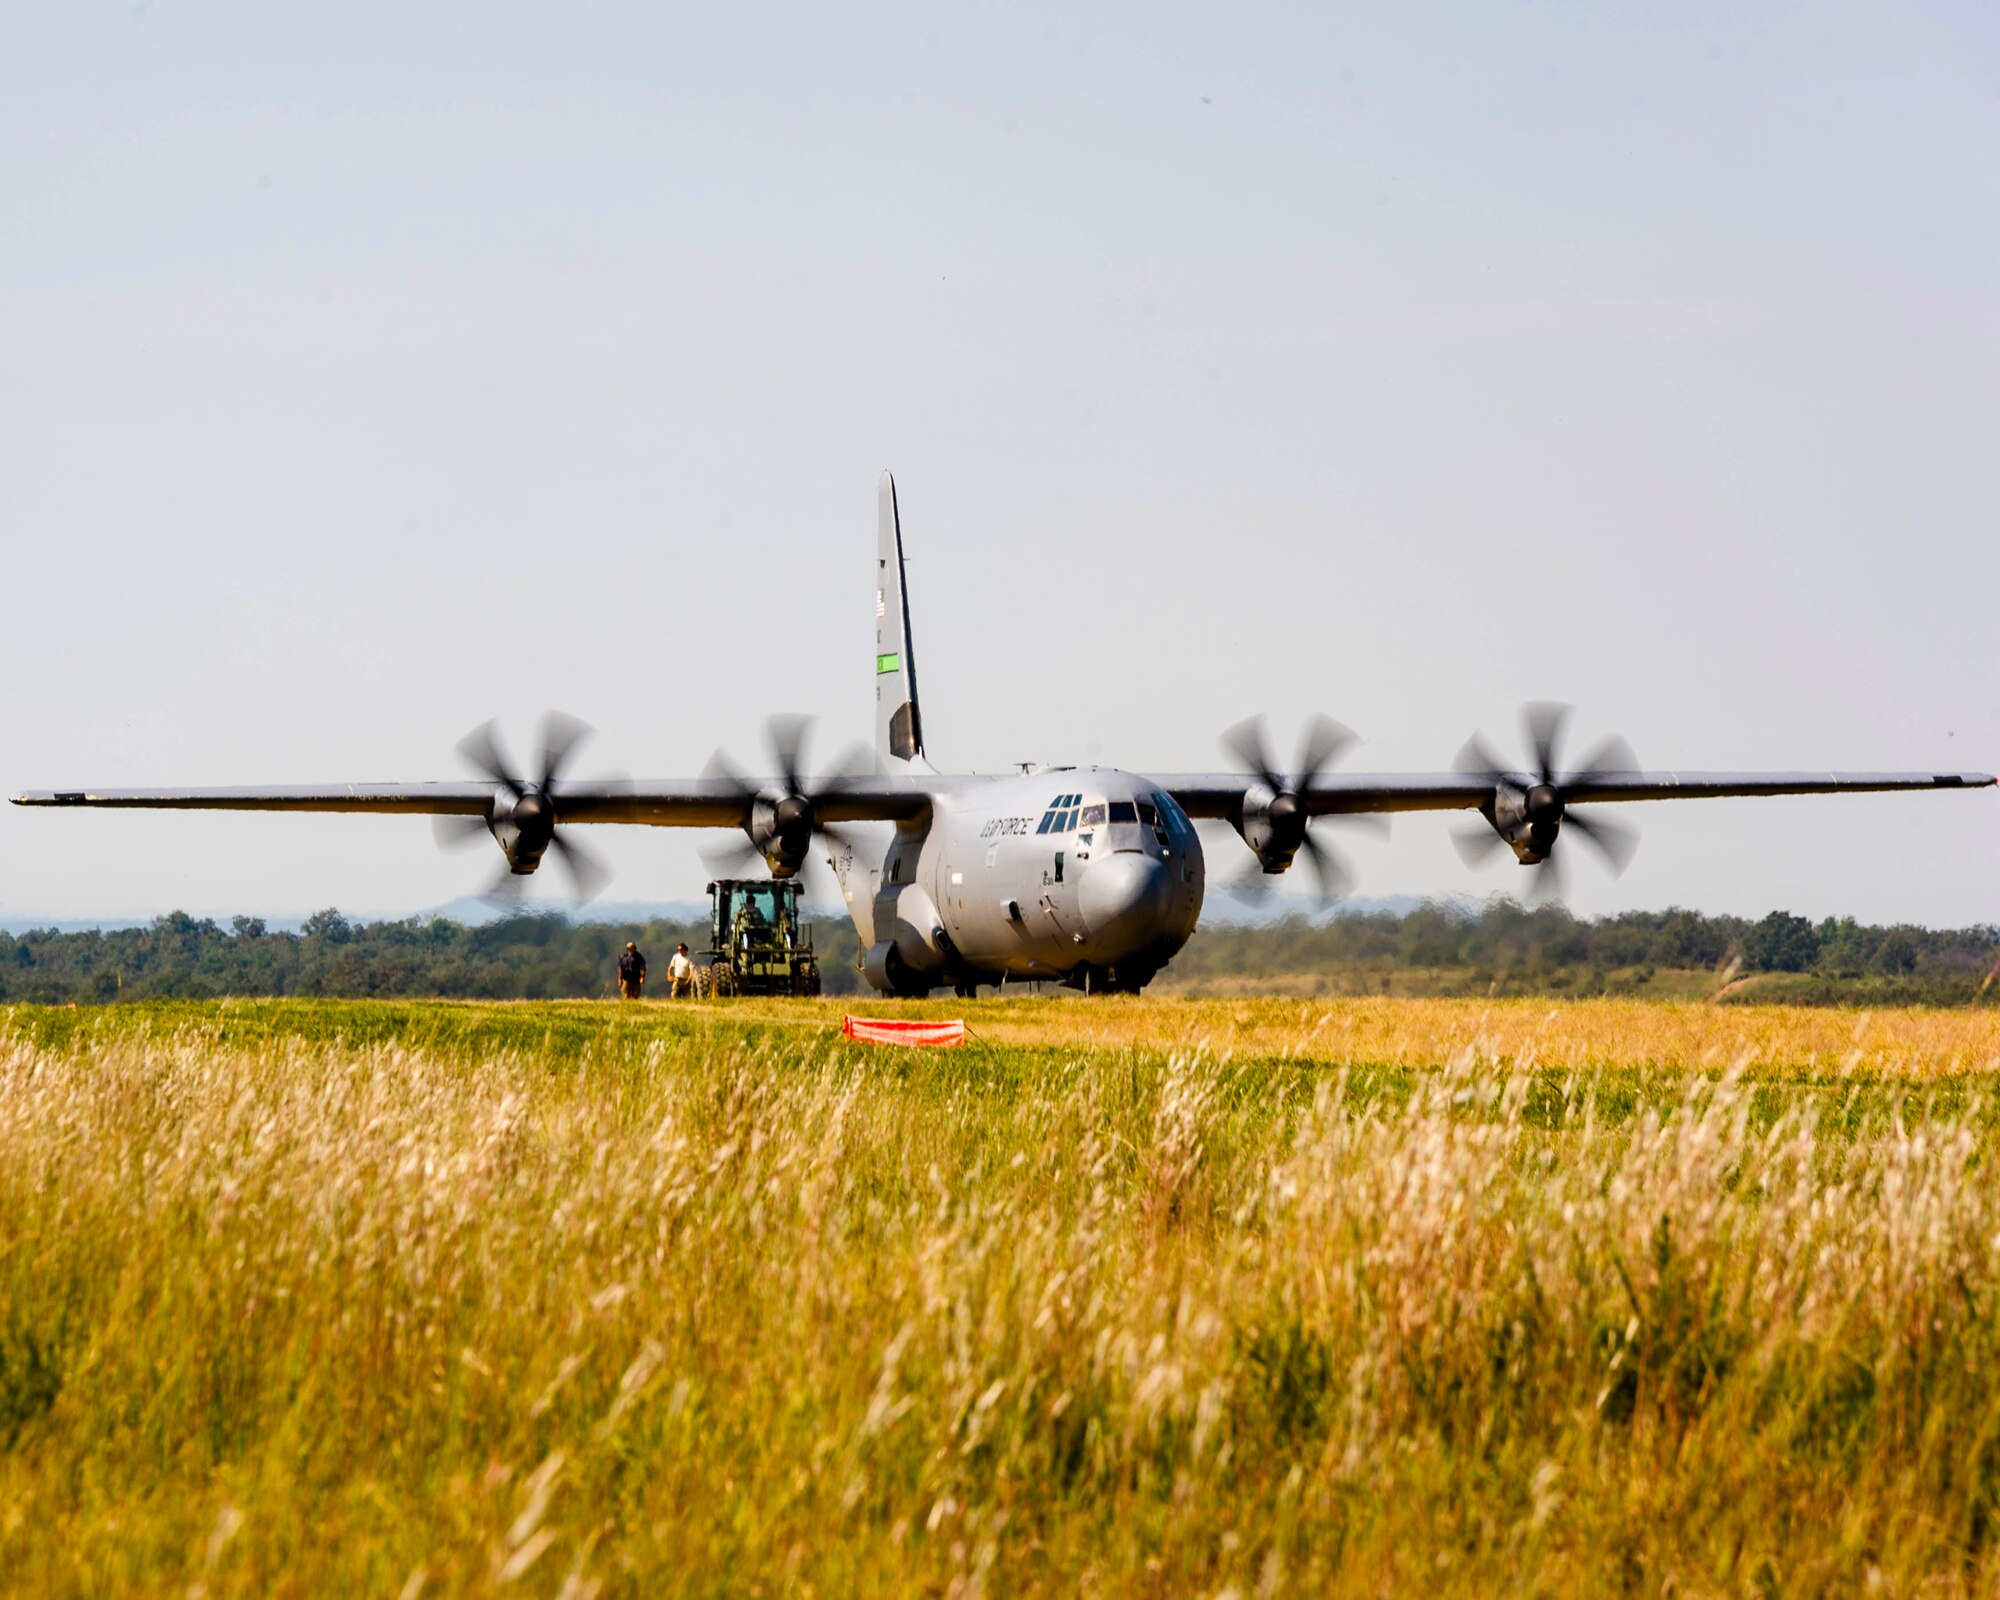 Air Force Reserve aerial transportation specialists approach a C-130J with a forklift to perform a combat offload method-B on a dirt landing zoneon Oct. 5, 2019, located on Fort Chaffee, Ark. Due to evolving combatant command requirements, the Air Force Reserves has increased focus on units operating effectively in degraded environments. (U.S. Air Force Reserve photo by Maj. Ashley Walker)